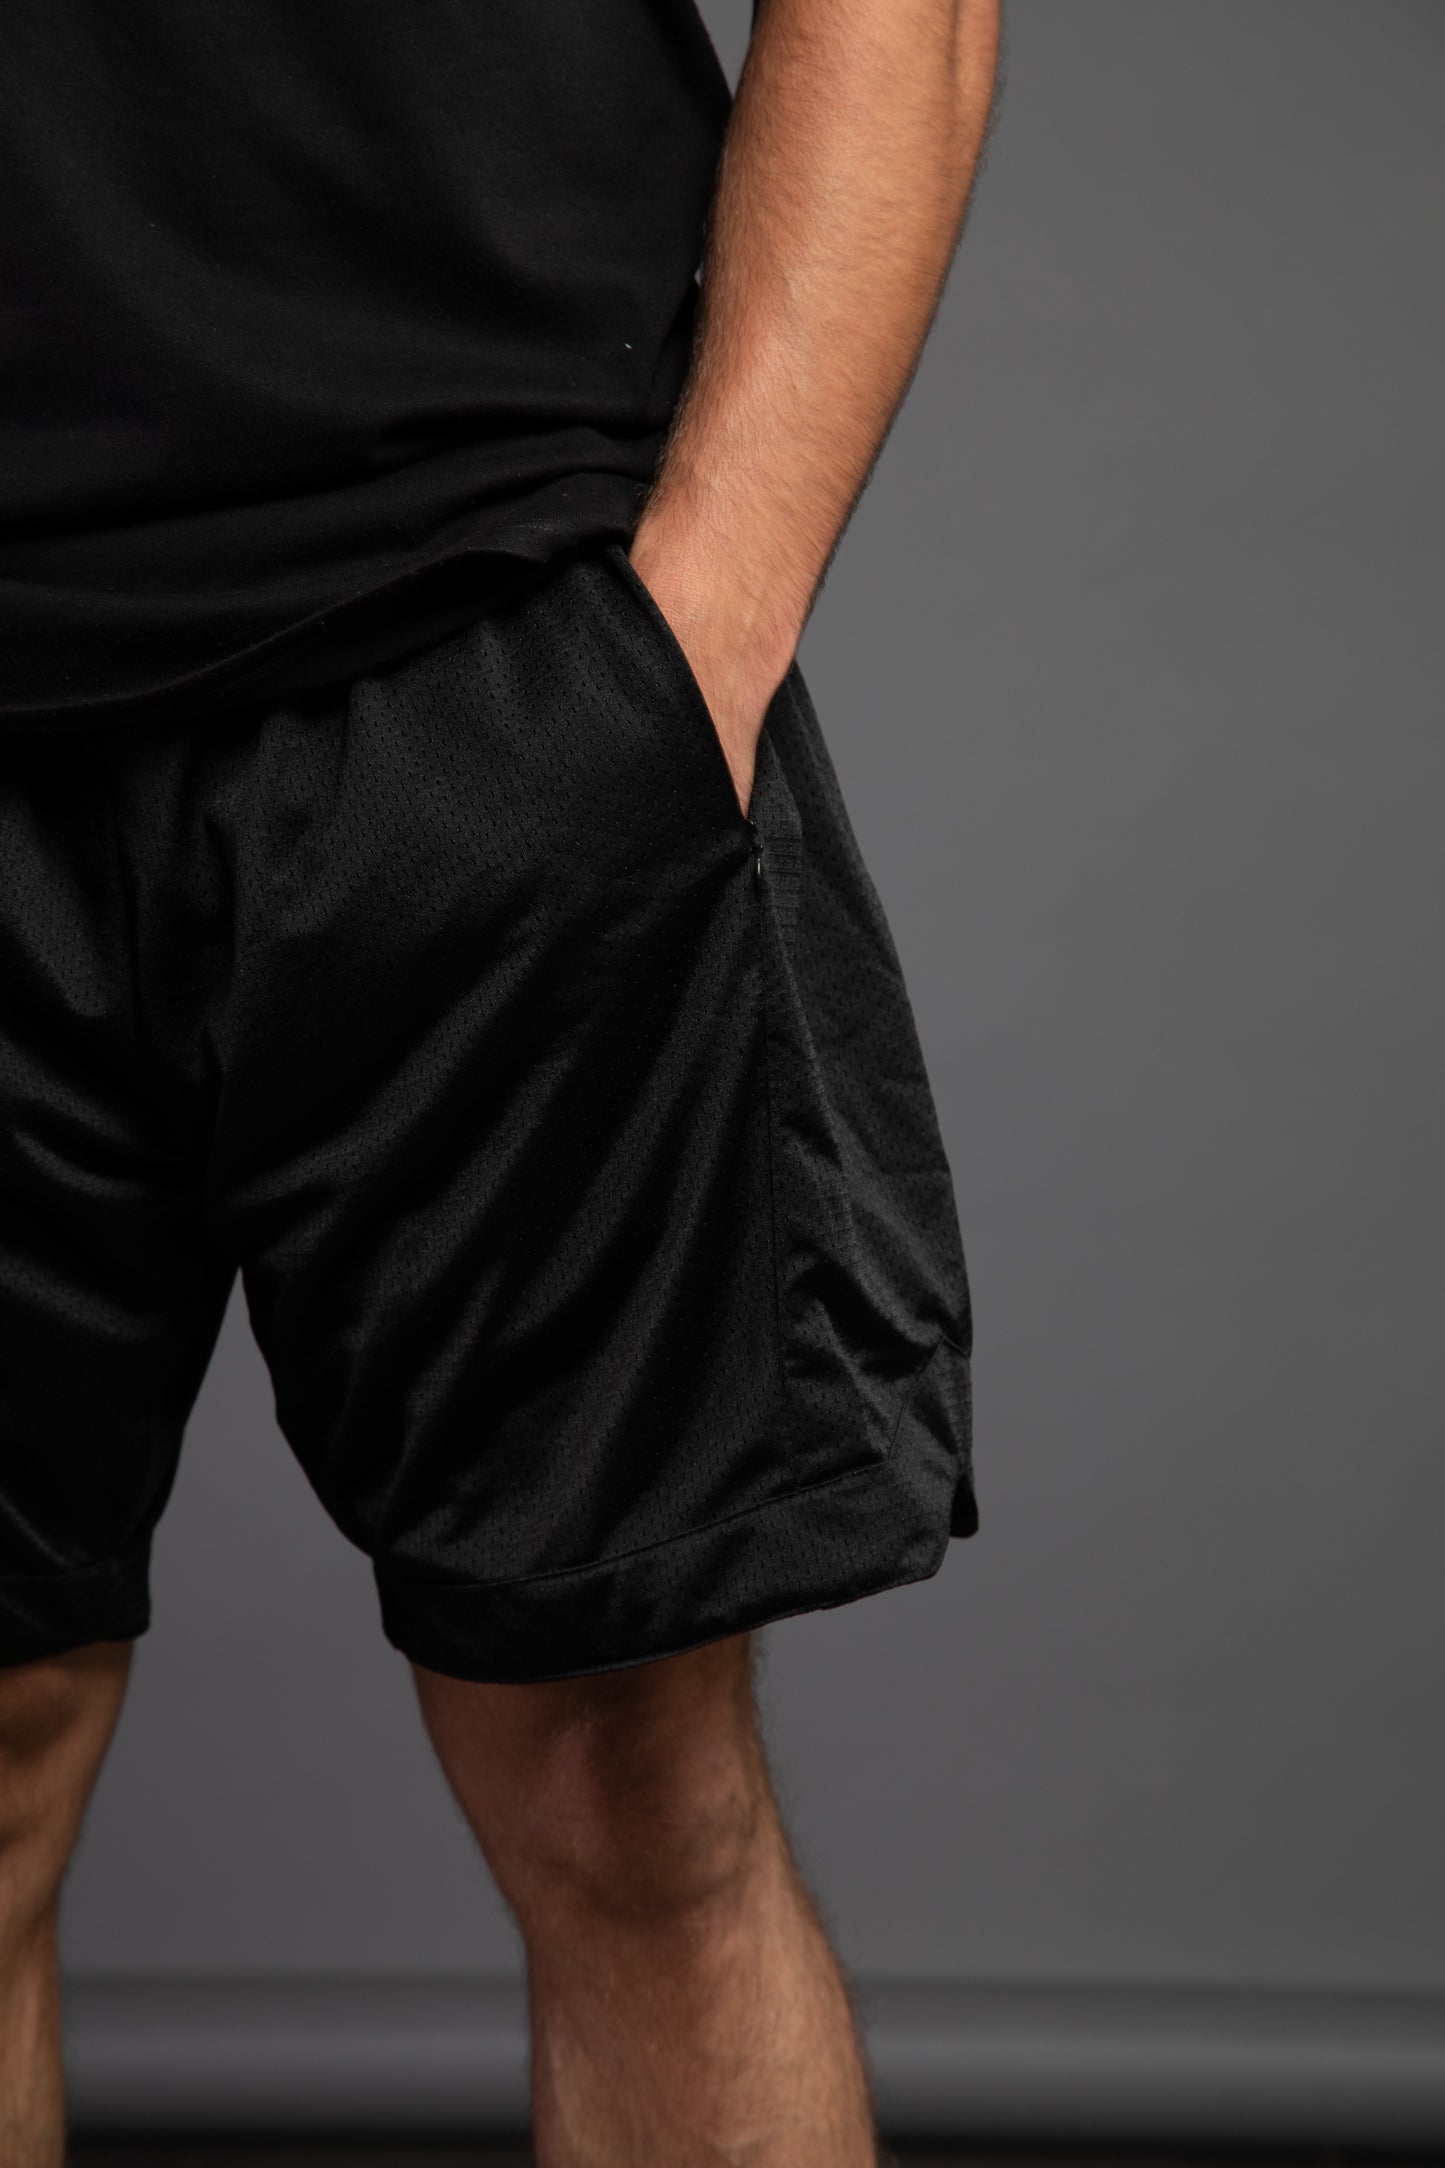 Cut and Sew - "All Day" Ball Shorts - Black